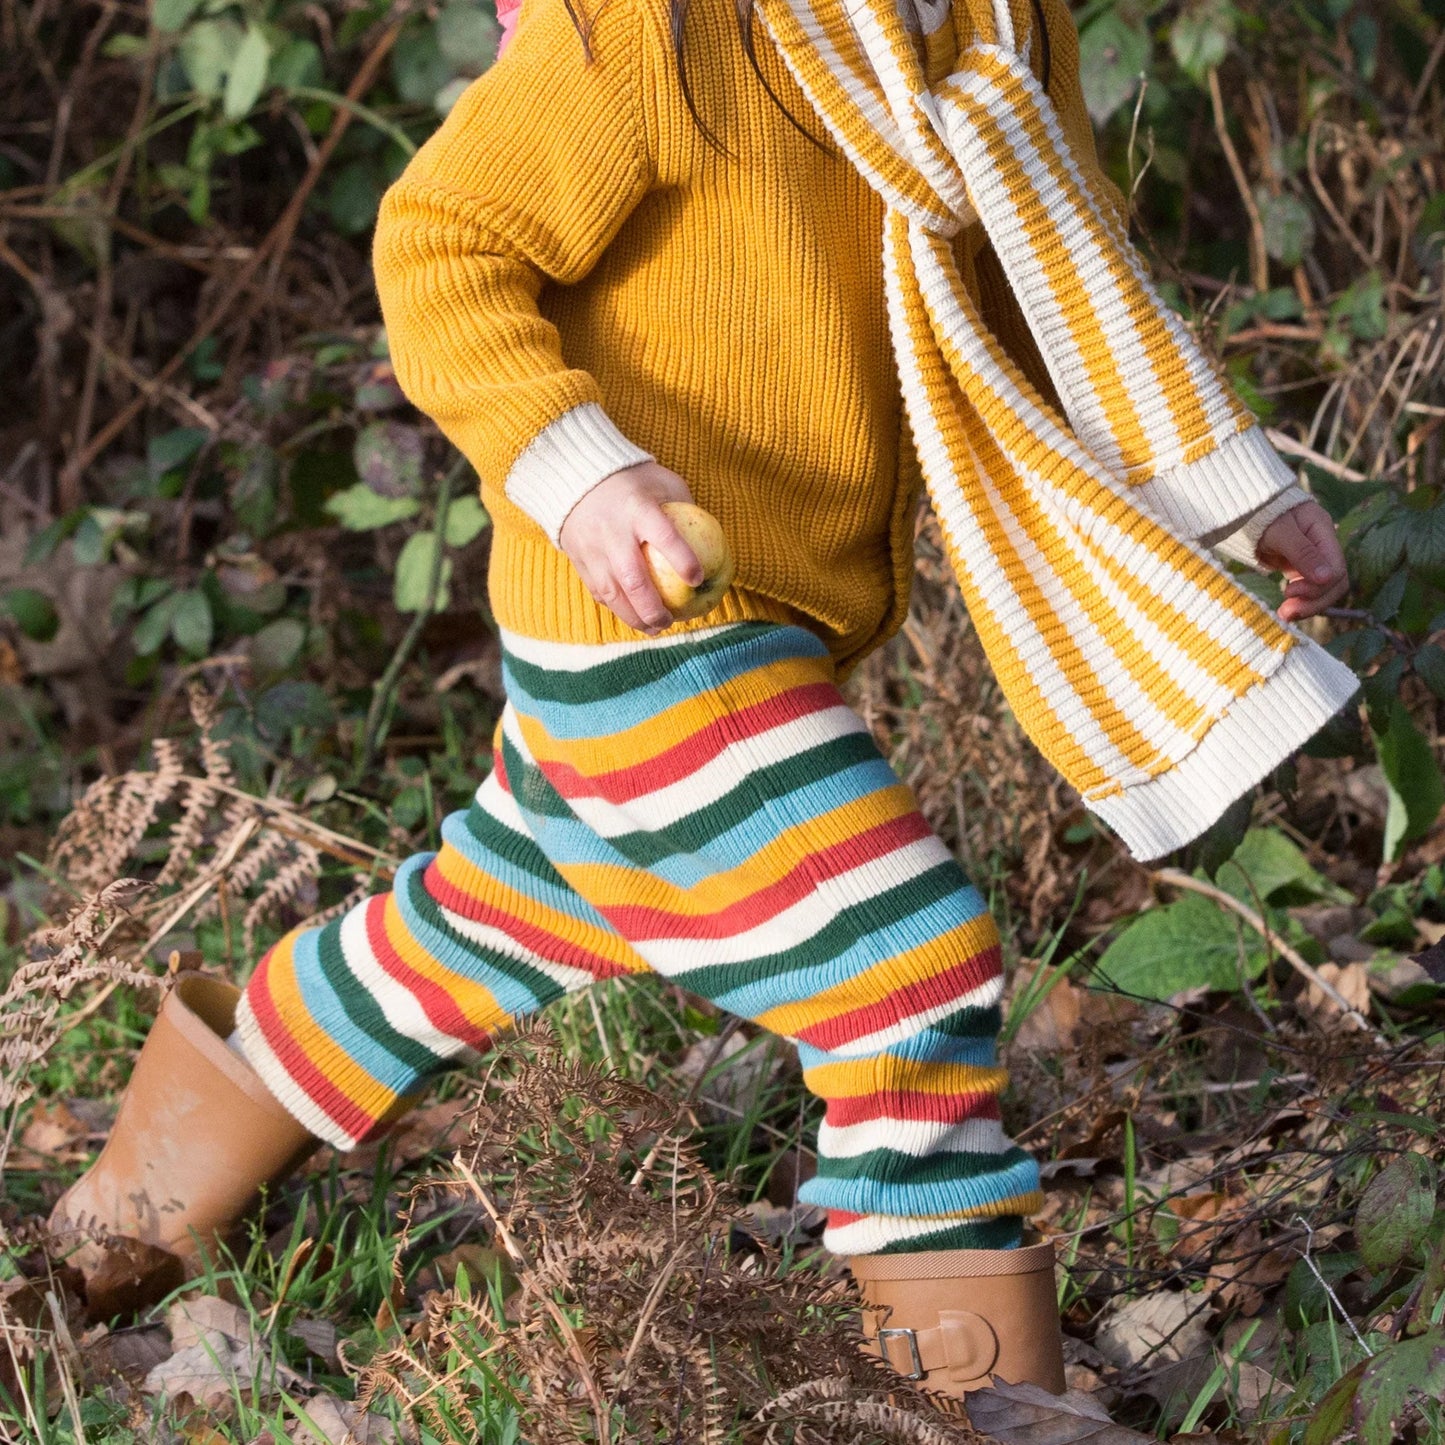 Little Green Radicals Rainbow Striped Knitted Joggers